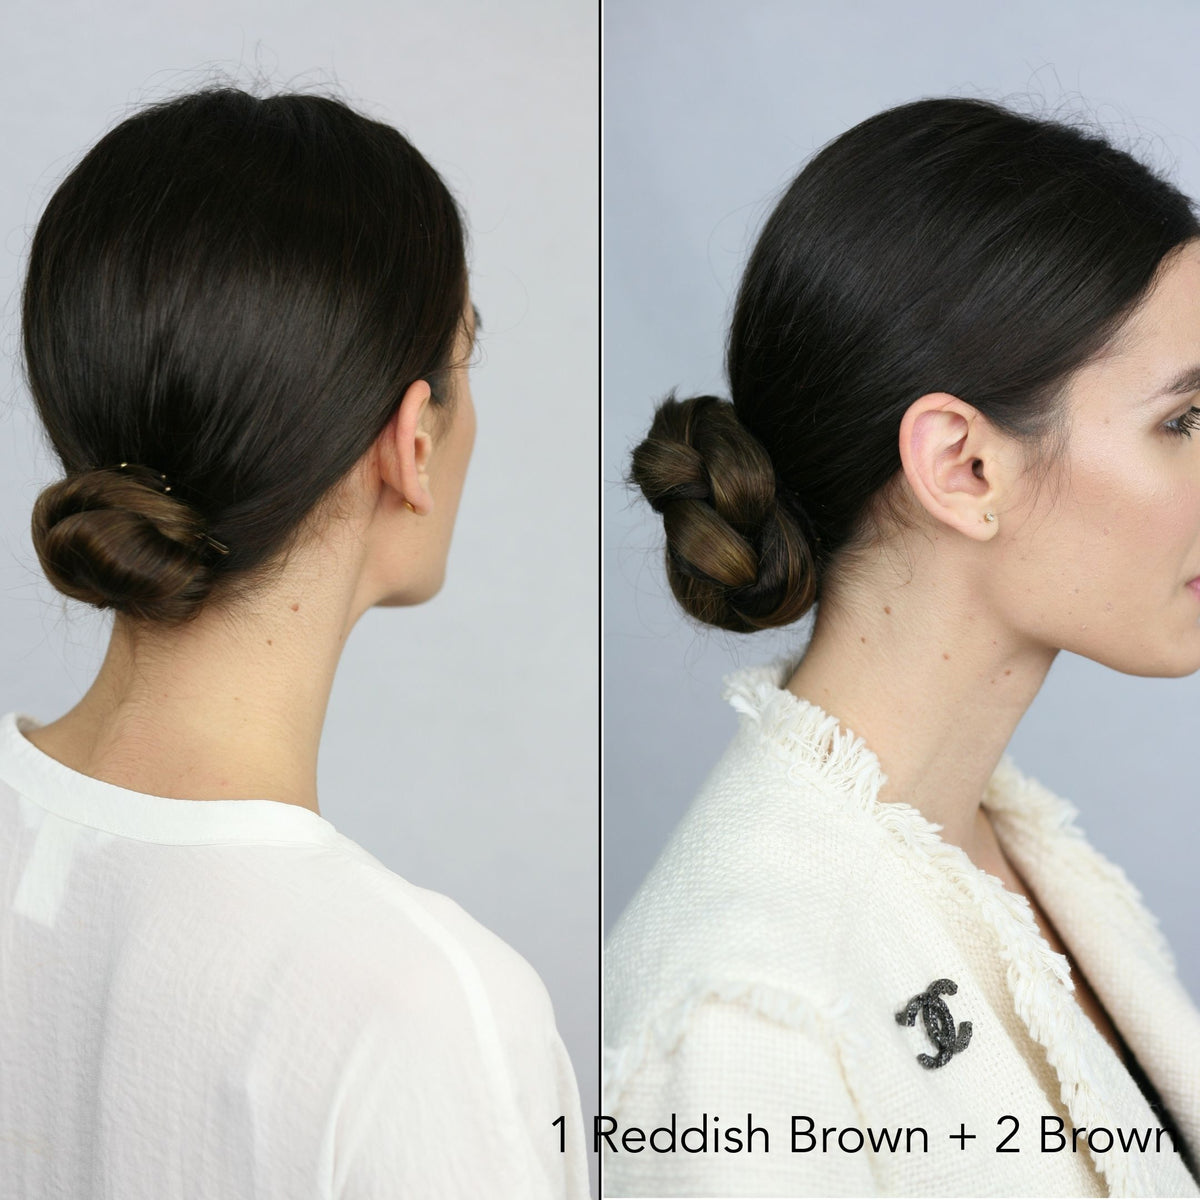 Transformation photo for Before After of woman in Chanel jacket with a Fine Hair Bun and showing the volume from her braided updo bun using Easy Updo Extensions